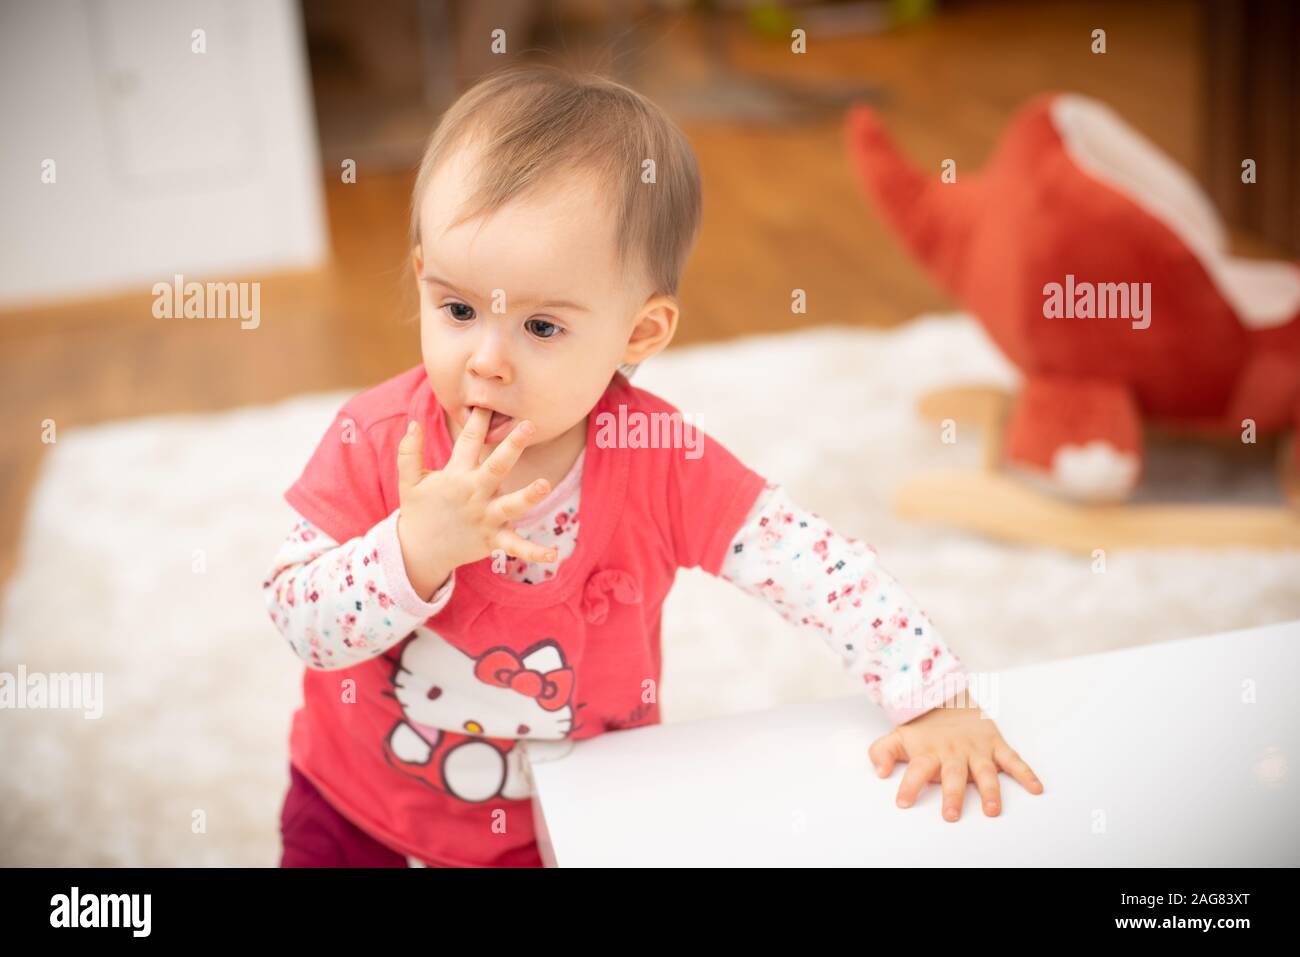 Cute 1 year old baby girl bites fingers, concept of teething. Girl in hello kitty red shirt standing Stock Photo